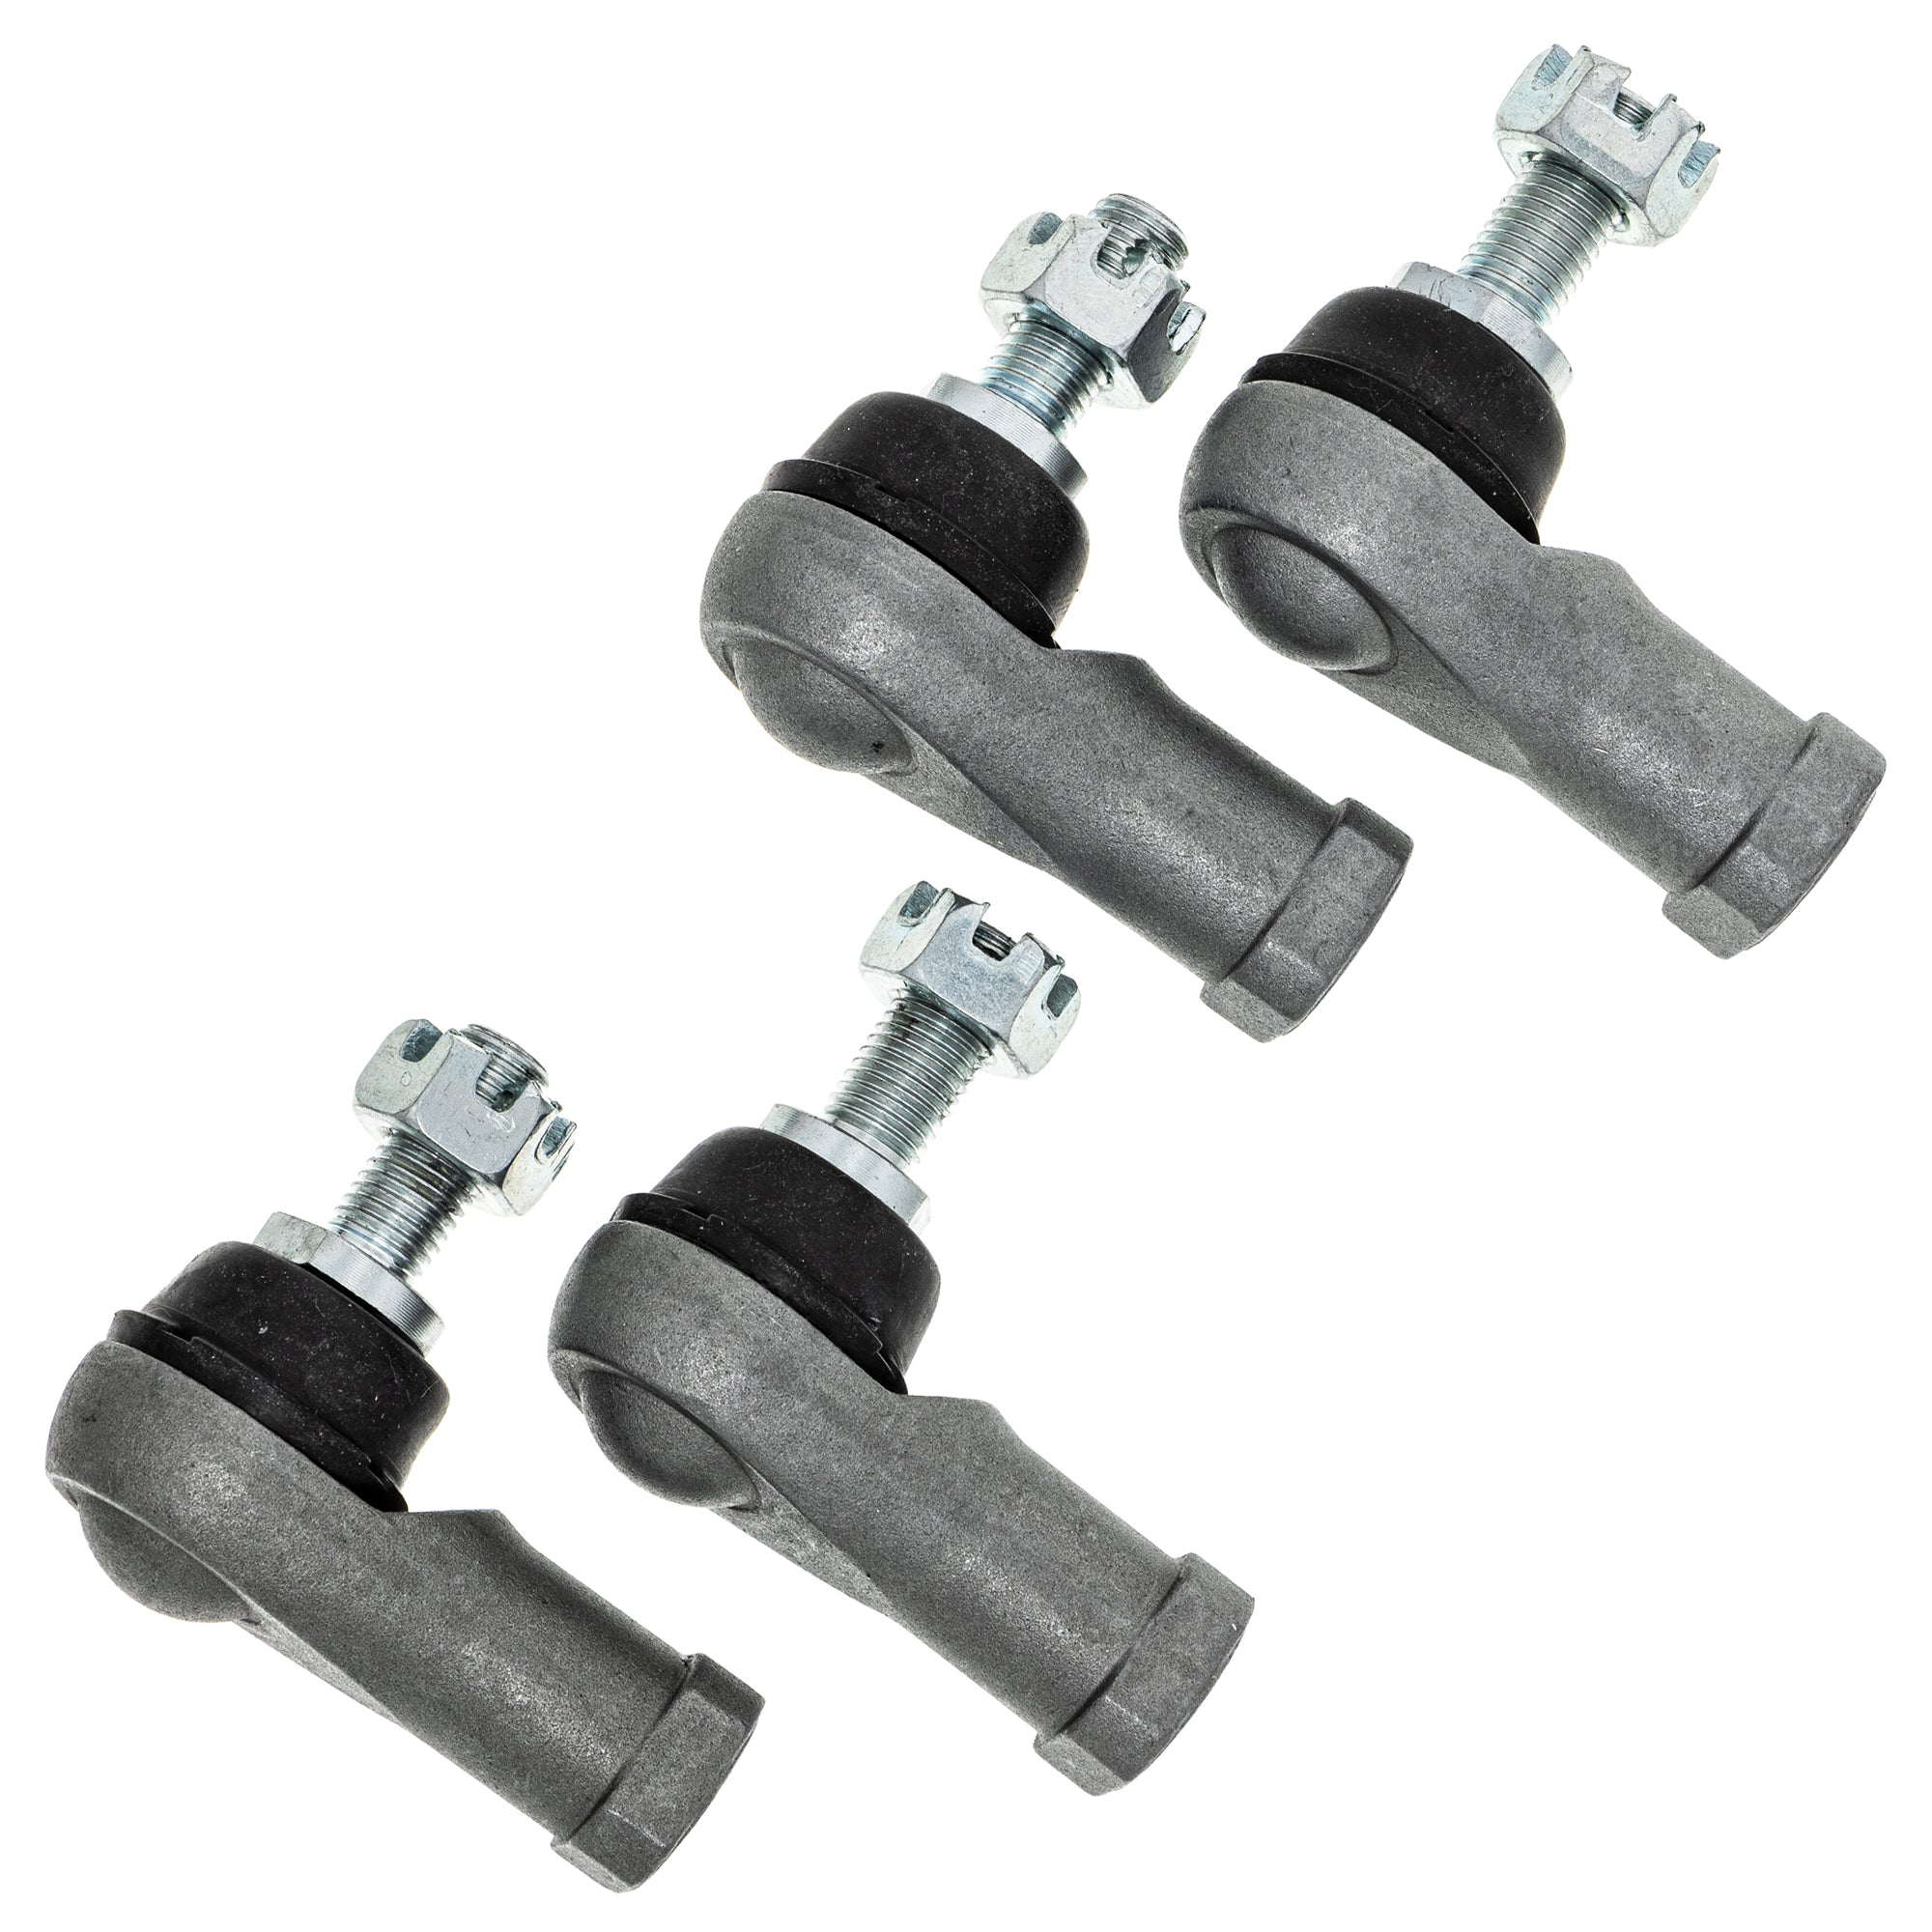 Tie Rod End Ball Joint Kit for zOTHER KFX700 NICHE 519-KTR2241E